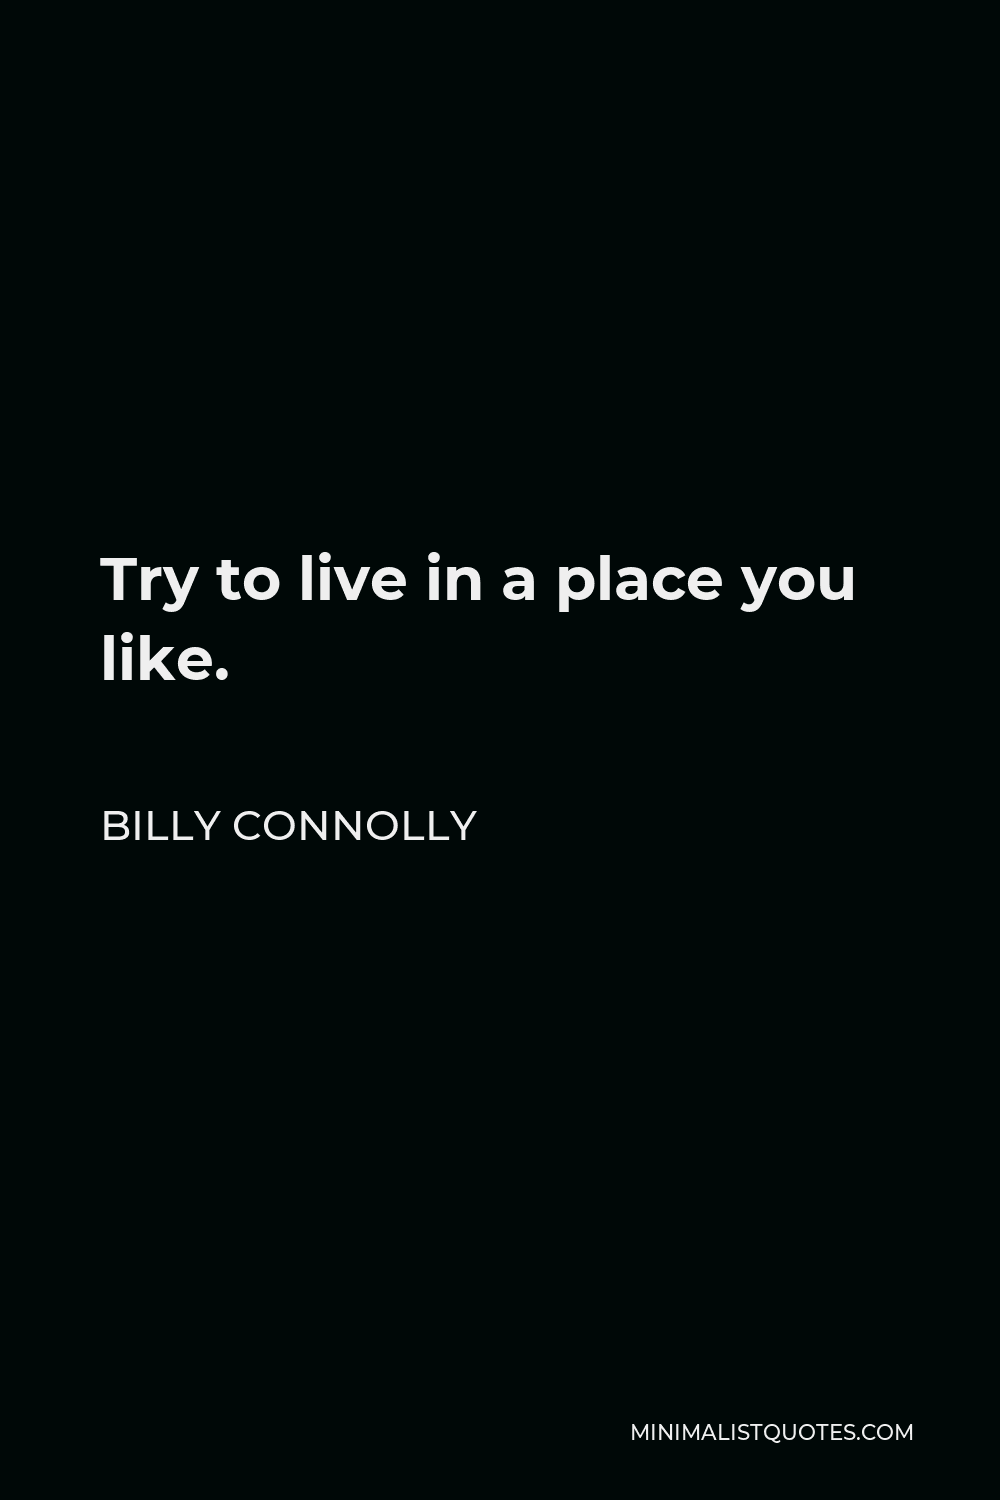 Billy Connolly Quote - Try to live in a place you like.